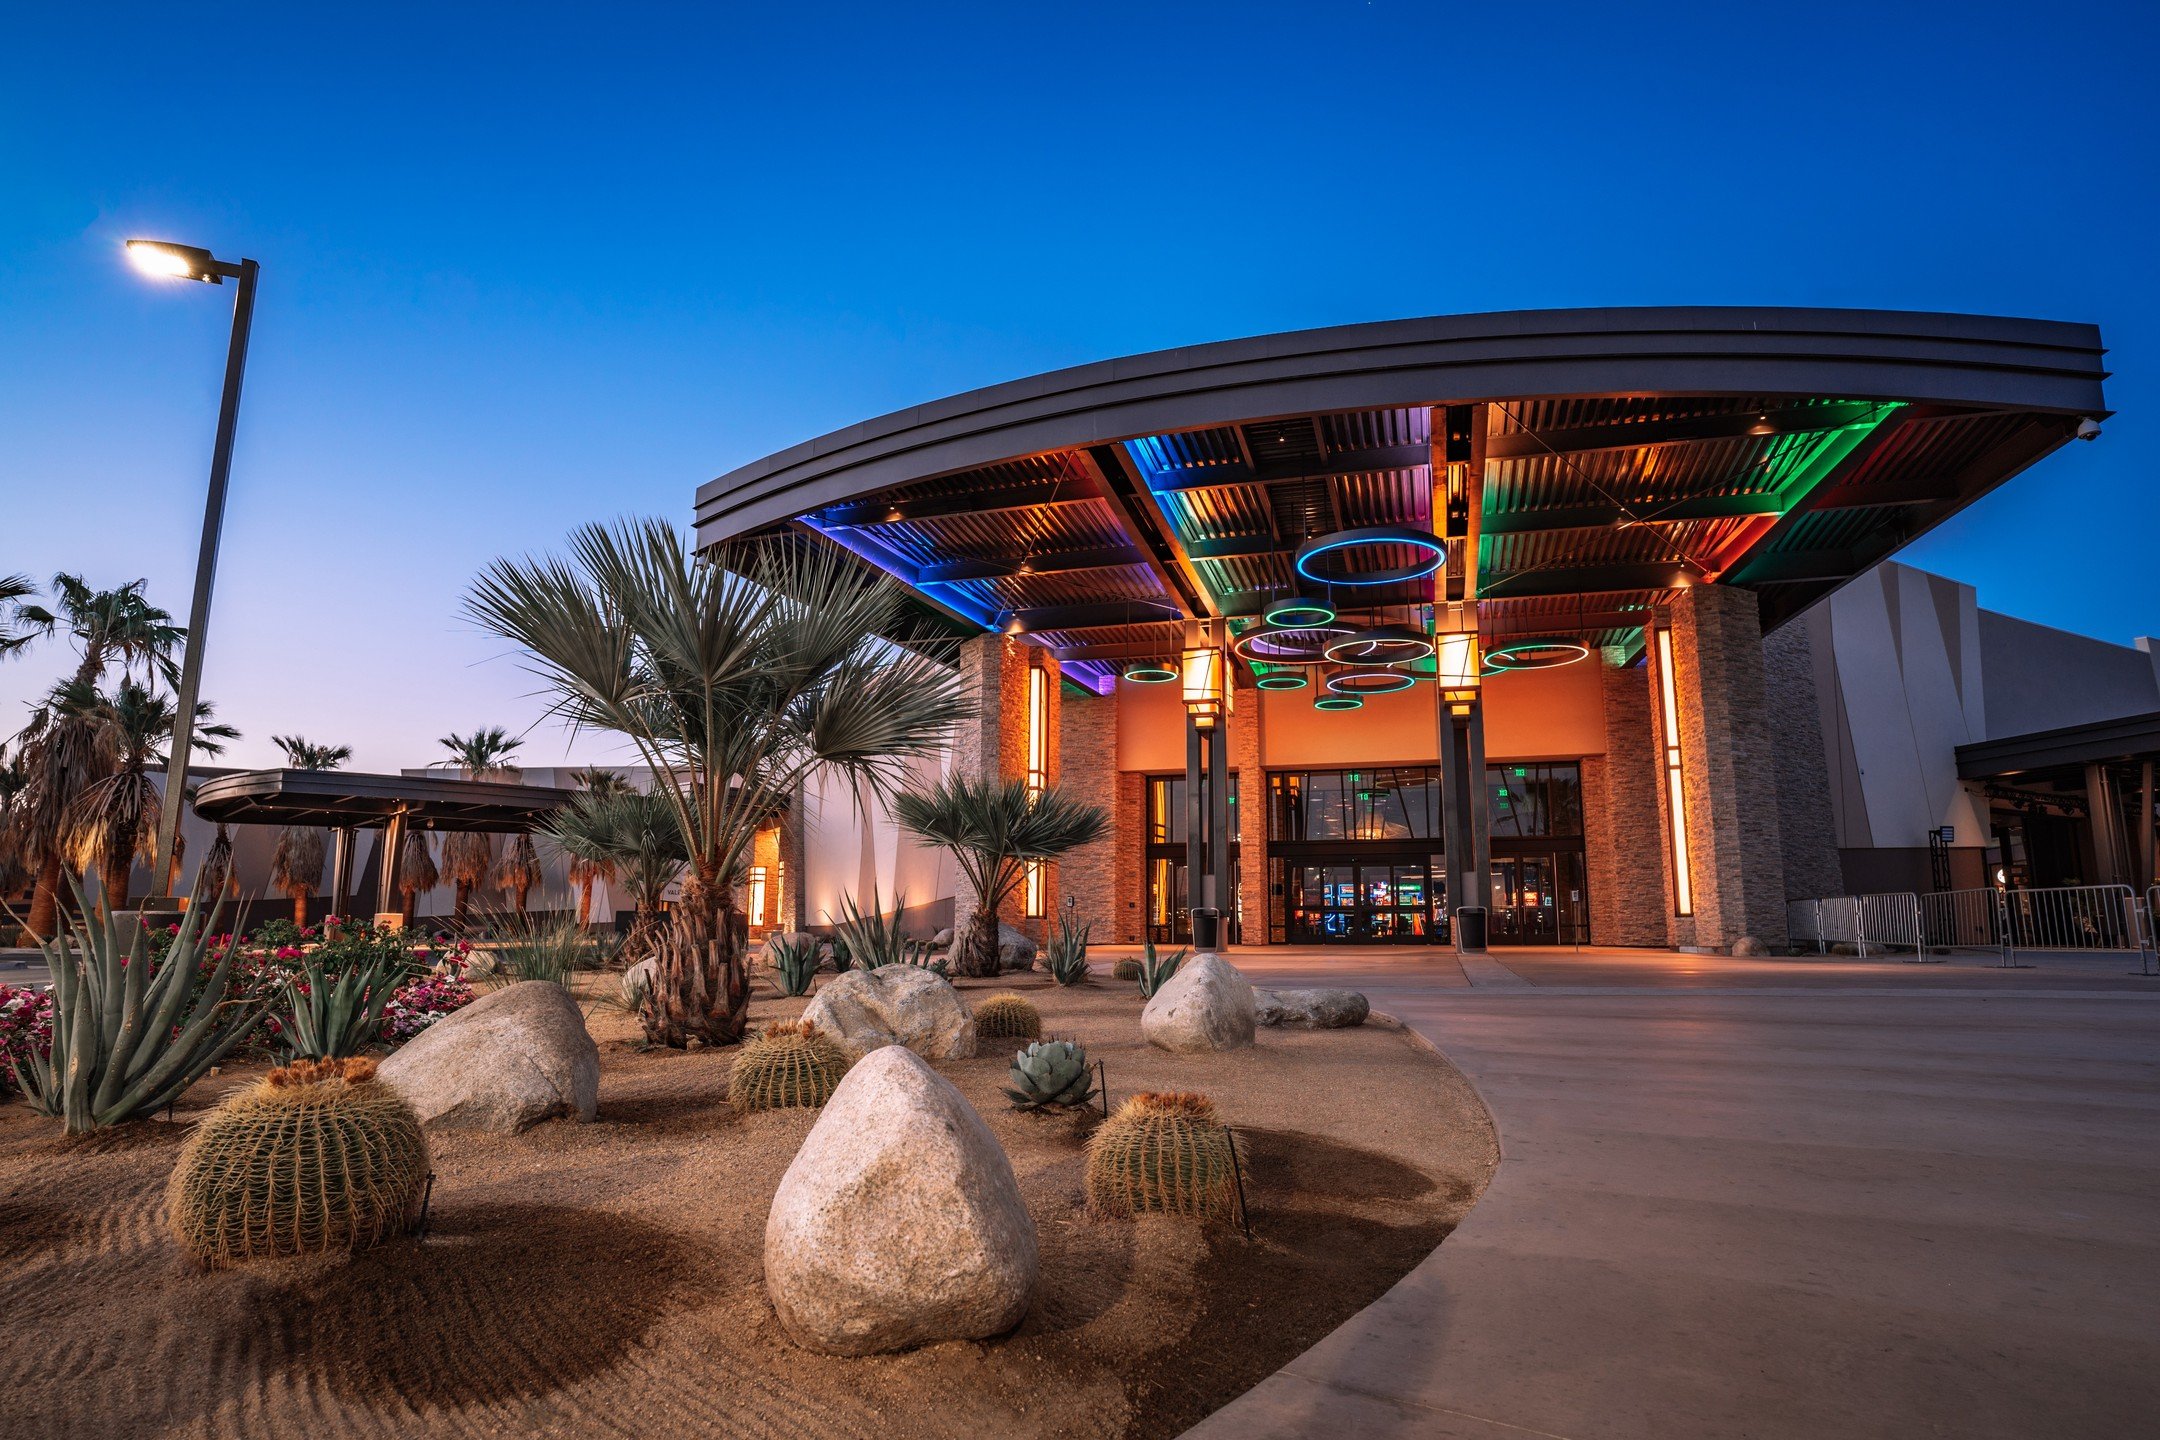 The season&rsquo;s gorgeous desert weather calls for outdoor concerts and there is no better place to experience live entertainment than Agave Caliente Terraza at Agua Caliente Casino Cathedral City. 

Upcoming shows include: 
John Waite on May 11 
Y